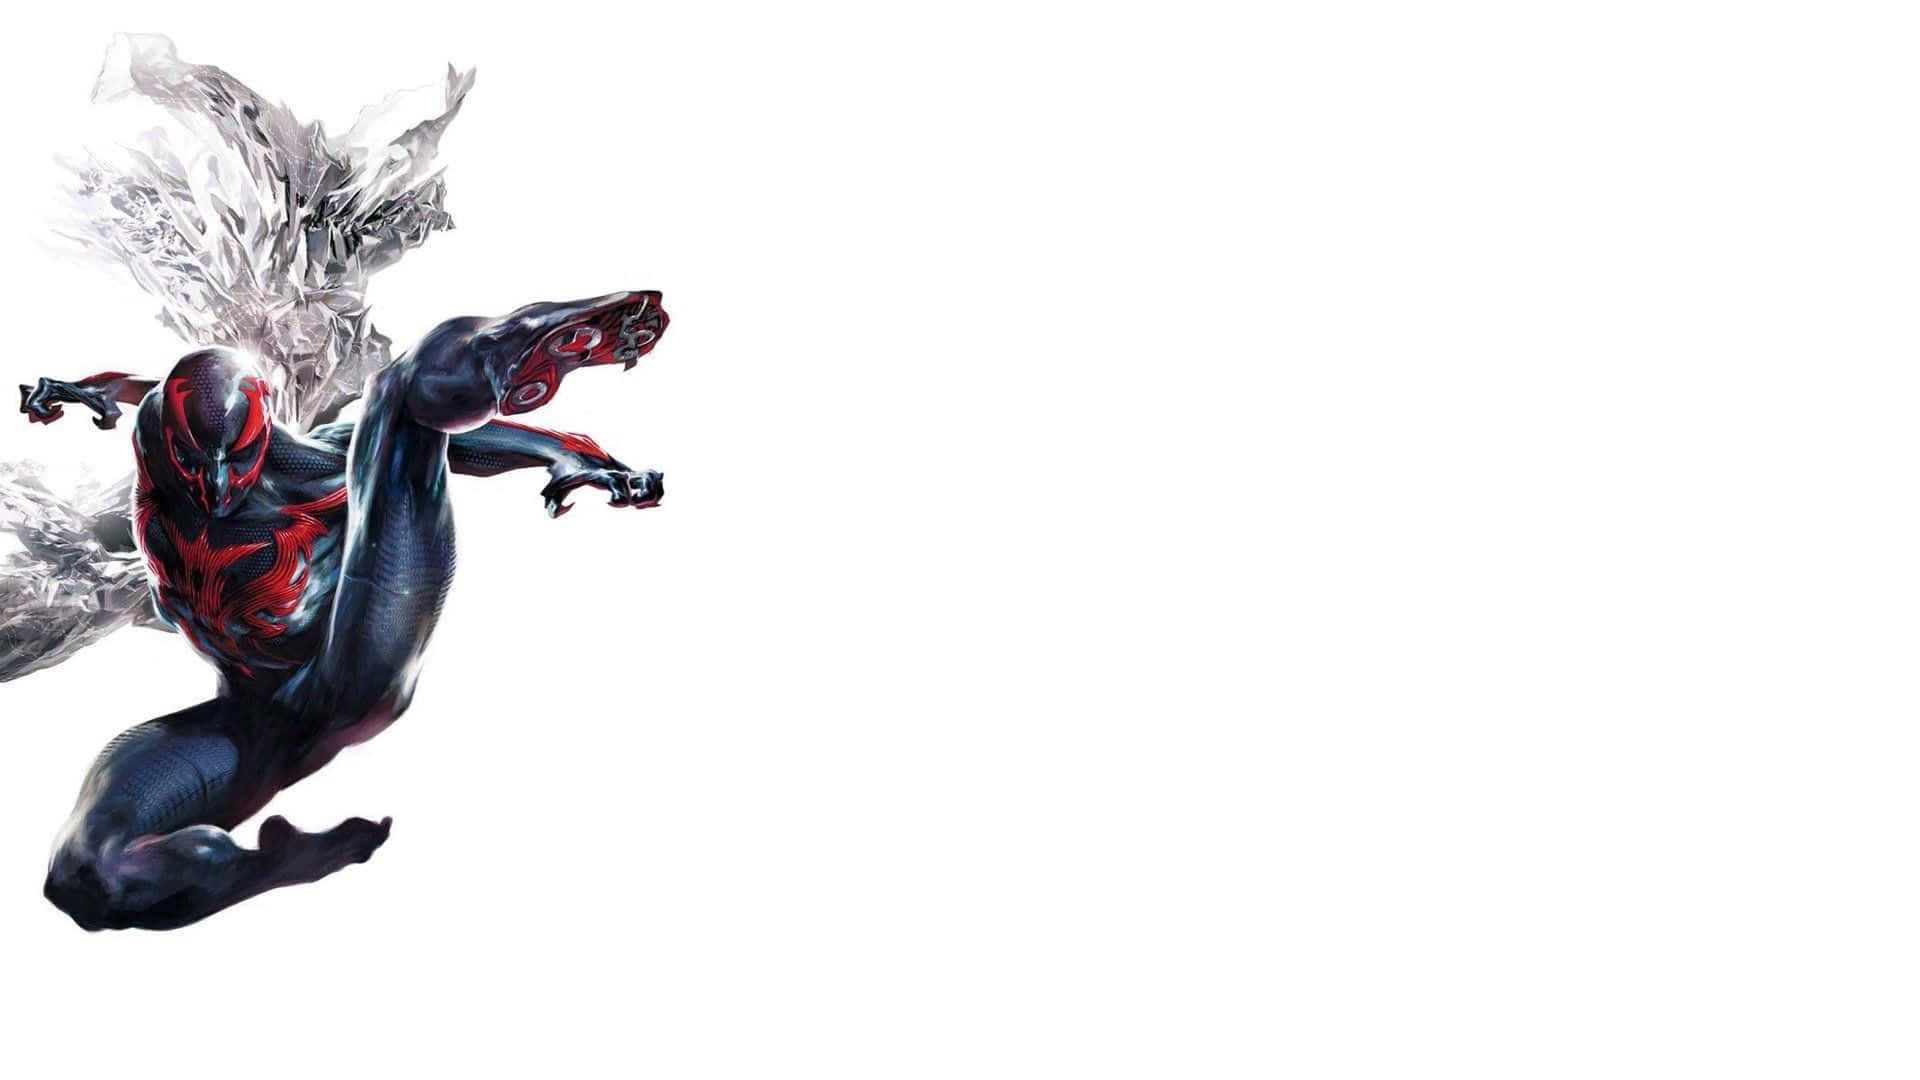 "Spider-Man 2099 in Action on a Futuristic City Background" Wallpaper